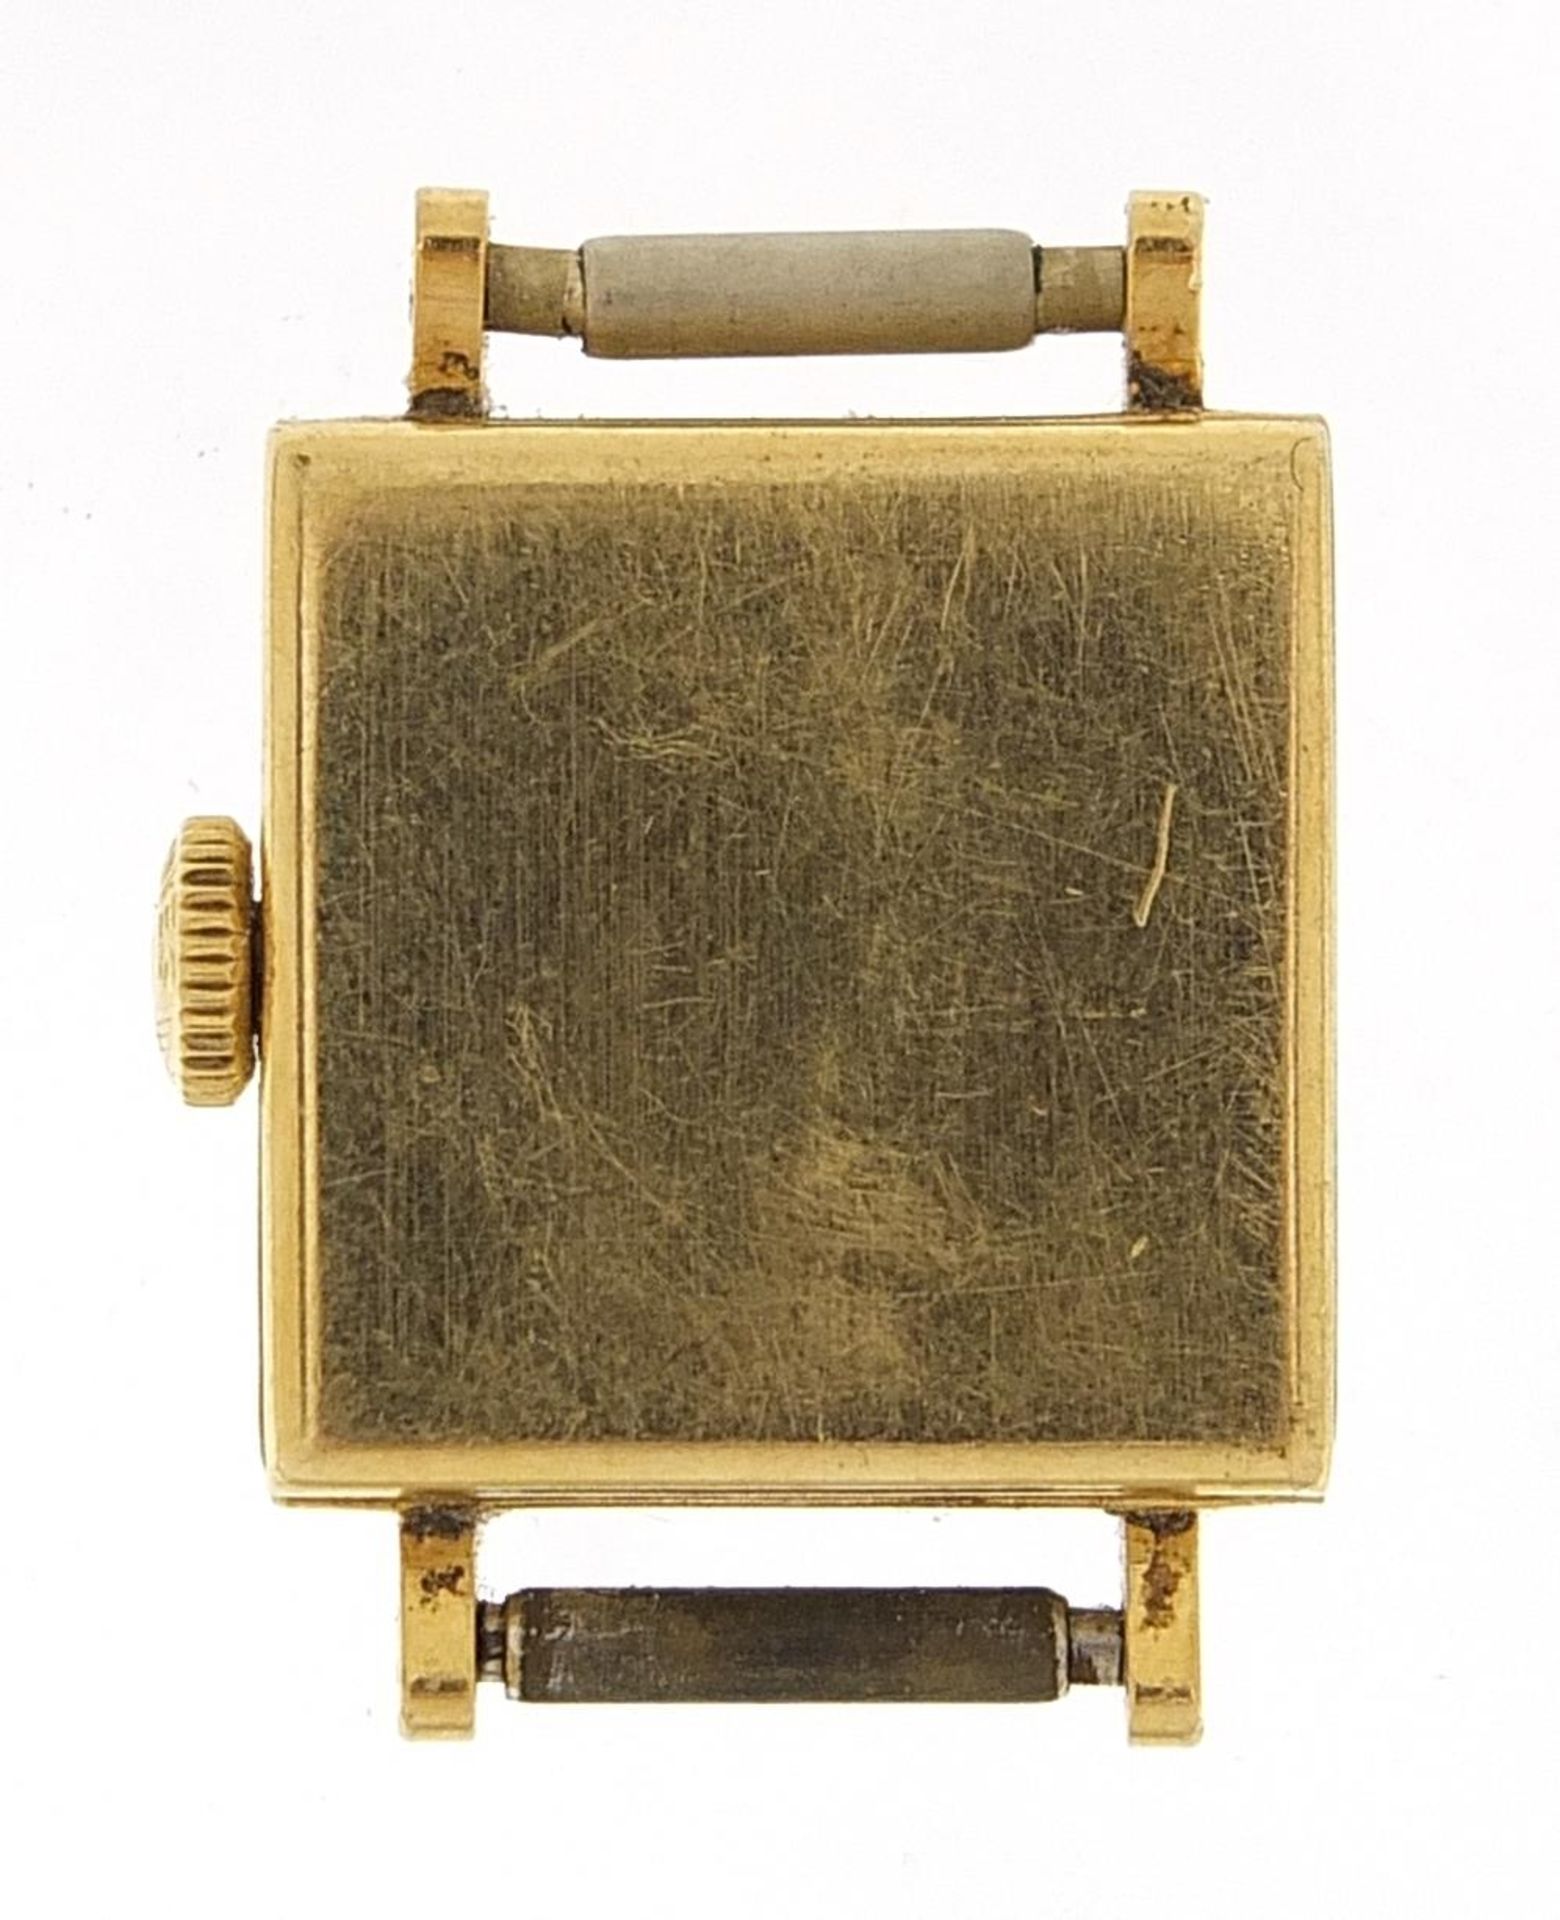 Longines, 18ct gold ladies manual wind wristwatch, the movement numbered 11367137, the case 16mm - Image 2 of 4